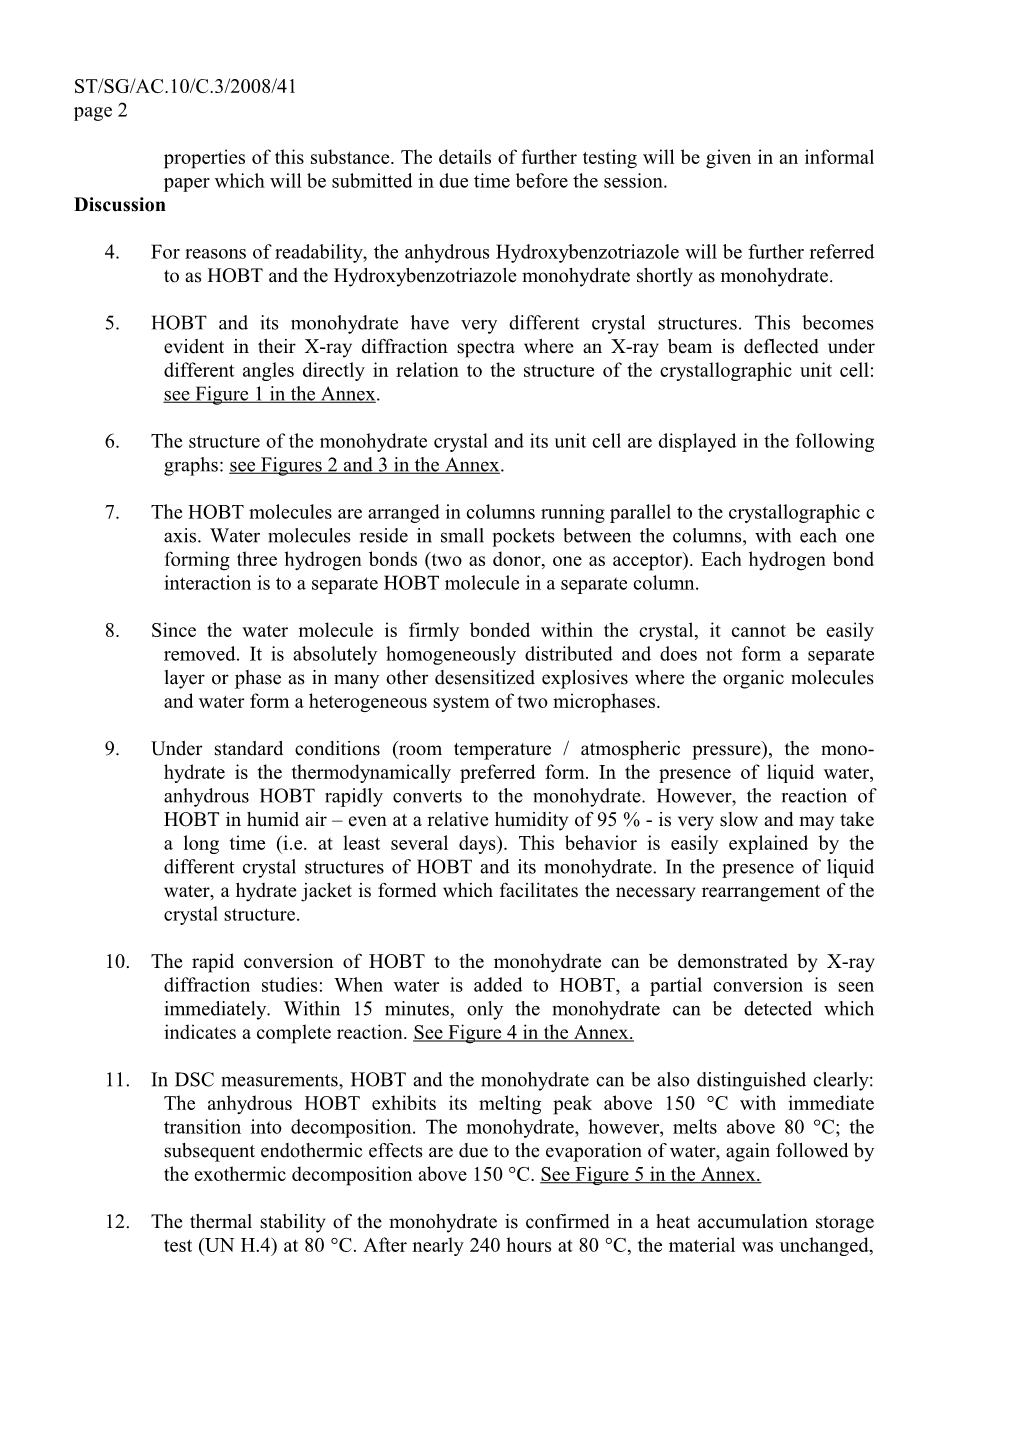 Amendment to UN 3474 for Inclusion of 1-Hobt Monohydrate